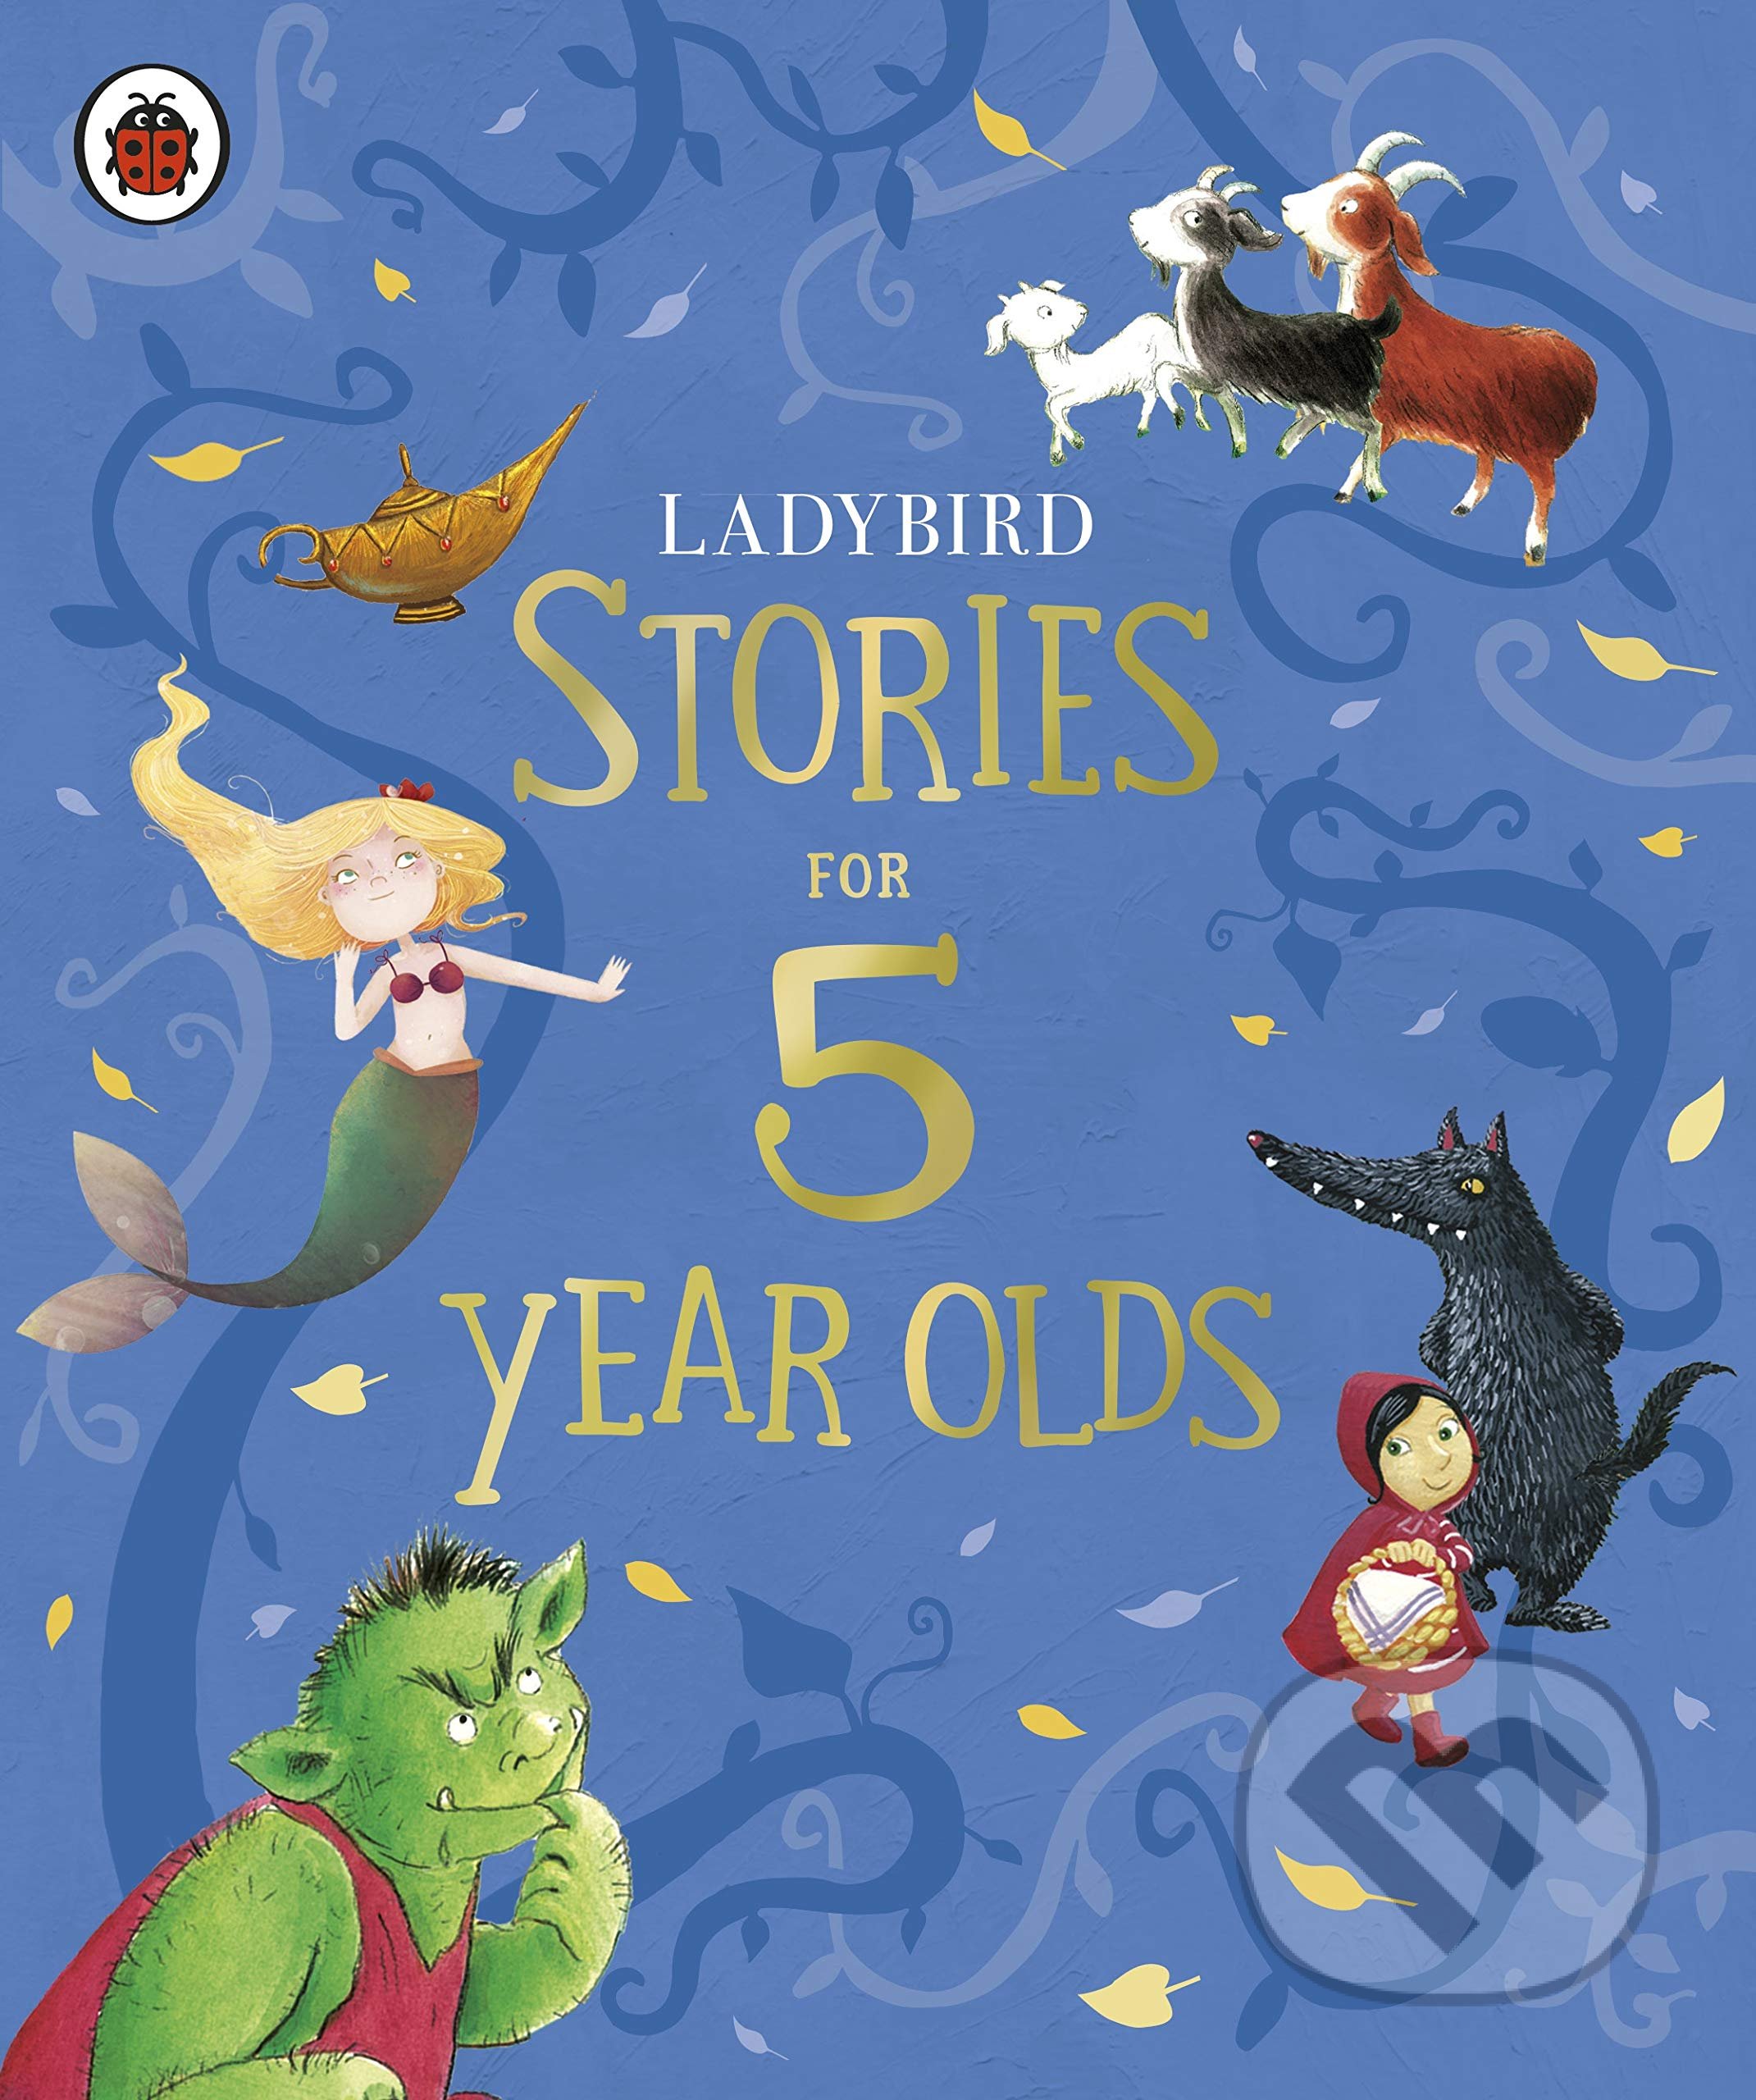 Ladybird Stories for 5 Year Olds, Ladybird Books, 2020